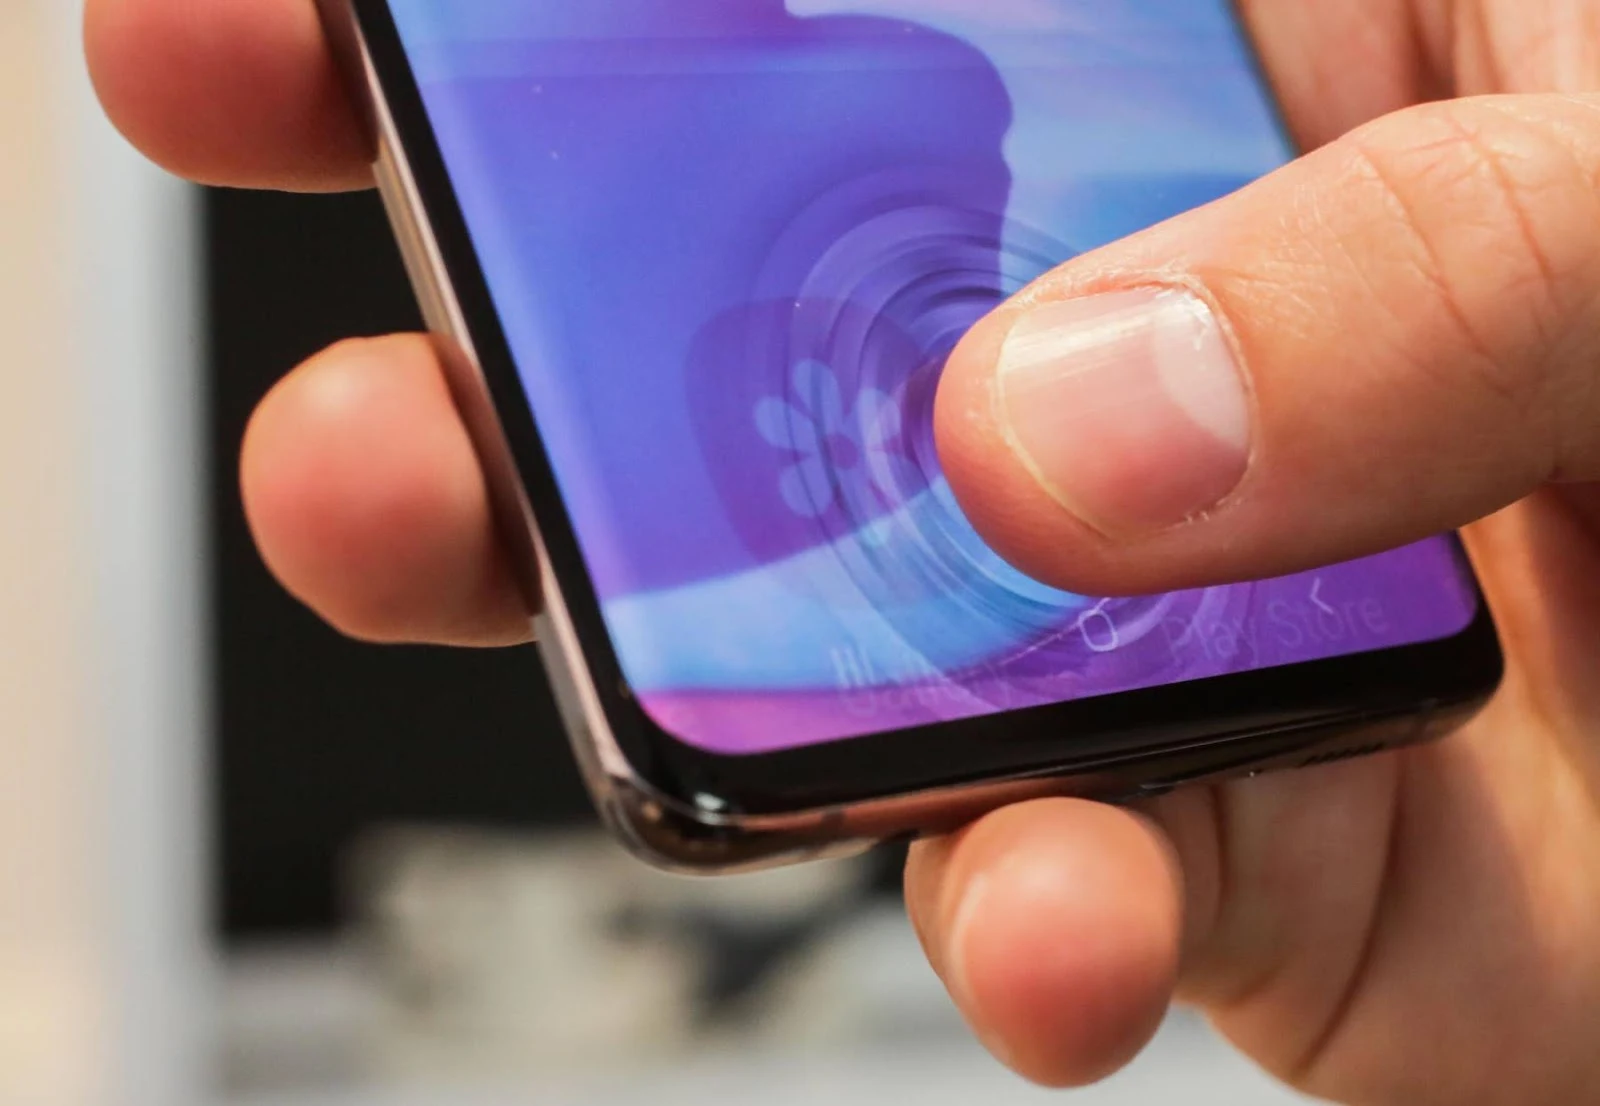 In an experiment a security researcher attempted to fool the Samsung Galaxy S10's ultrasonic fingerprint scanner by using 3d printing